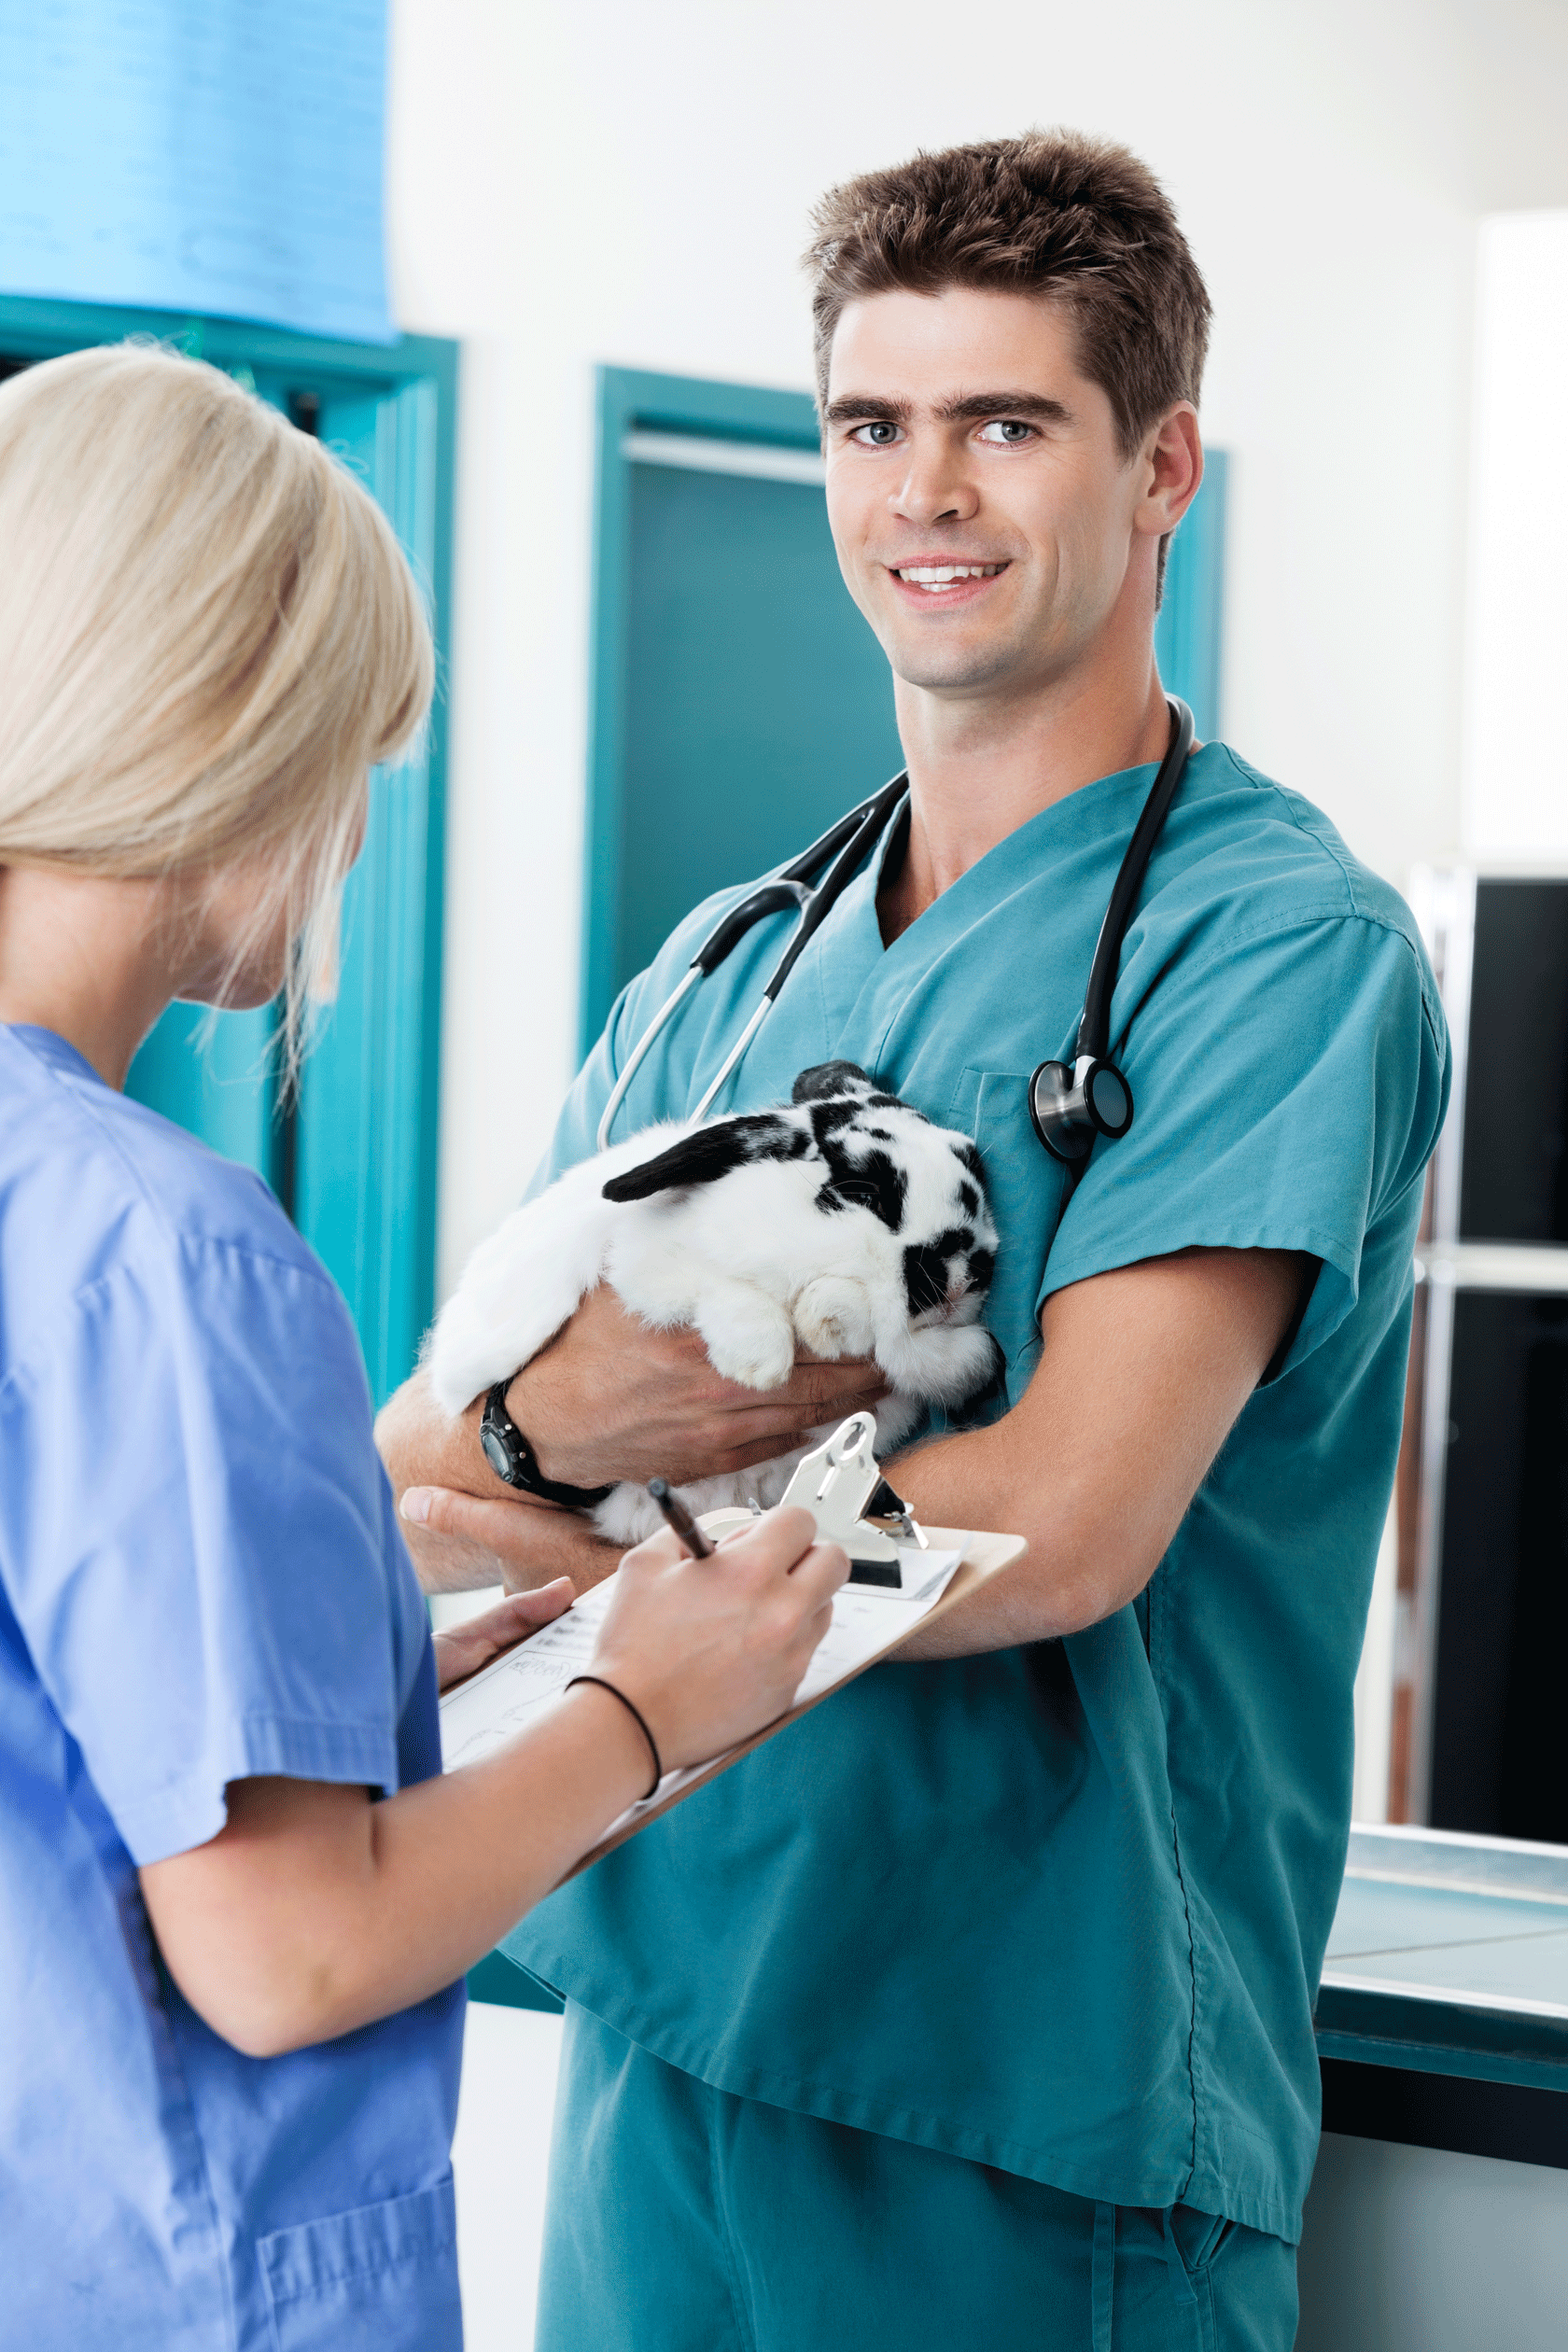 10 Tips for Starting a Veterinary Clinic